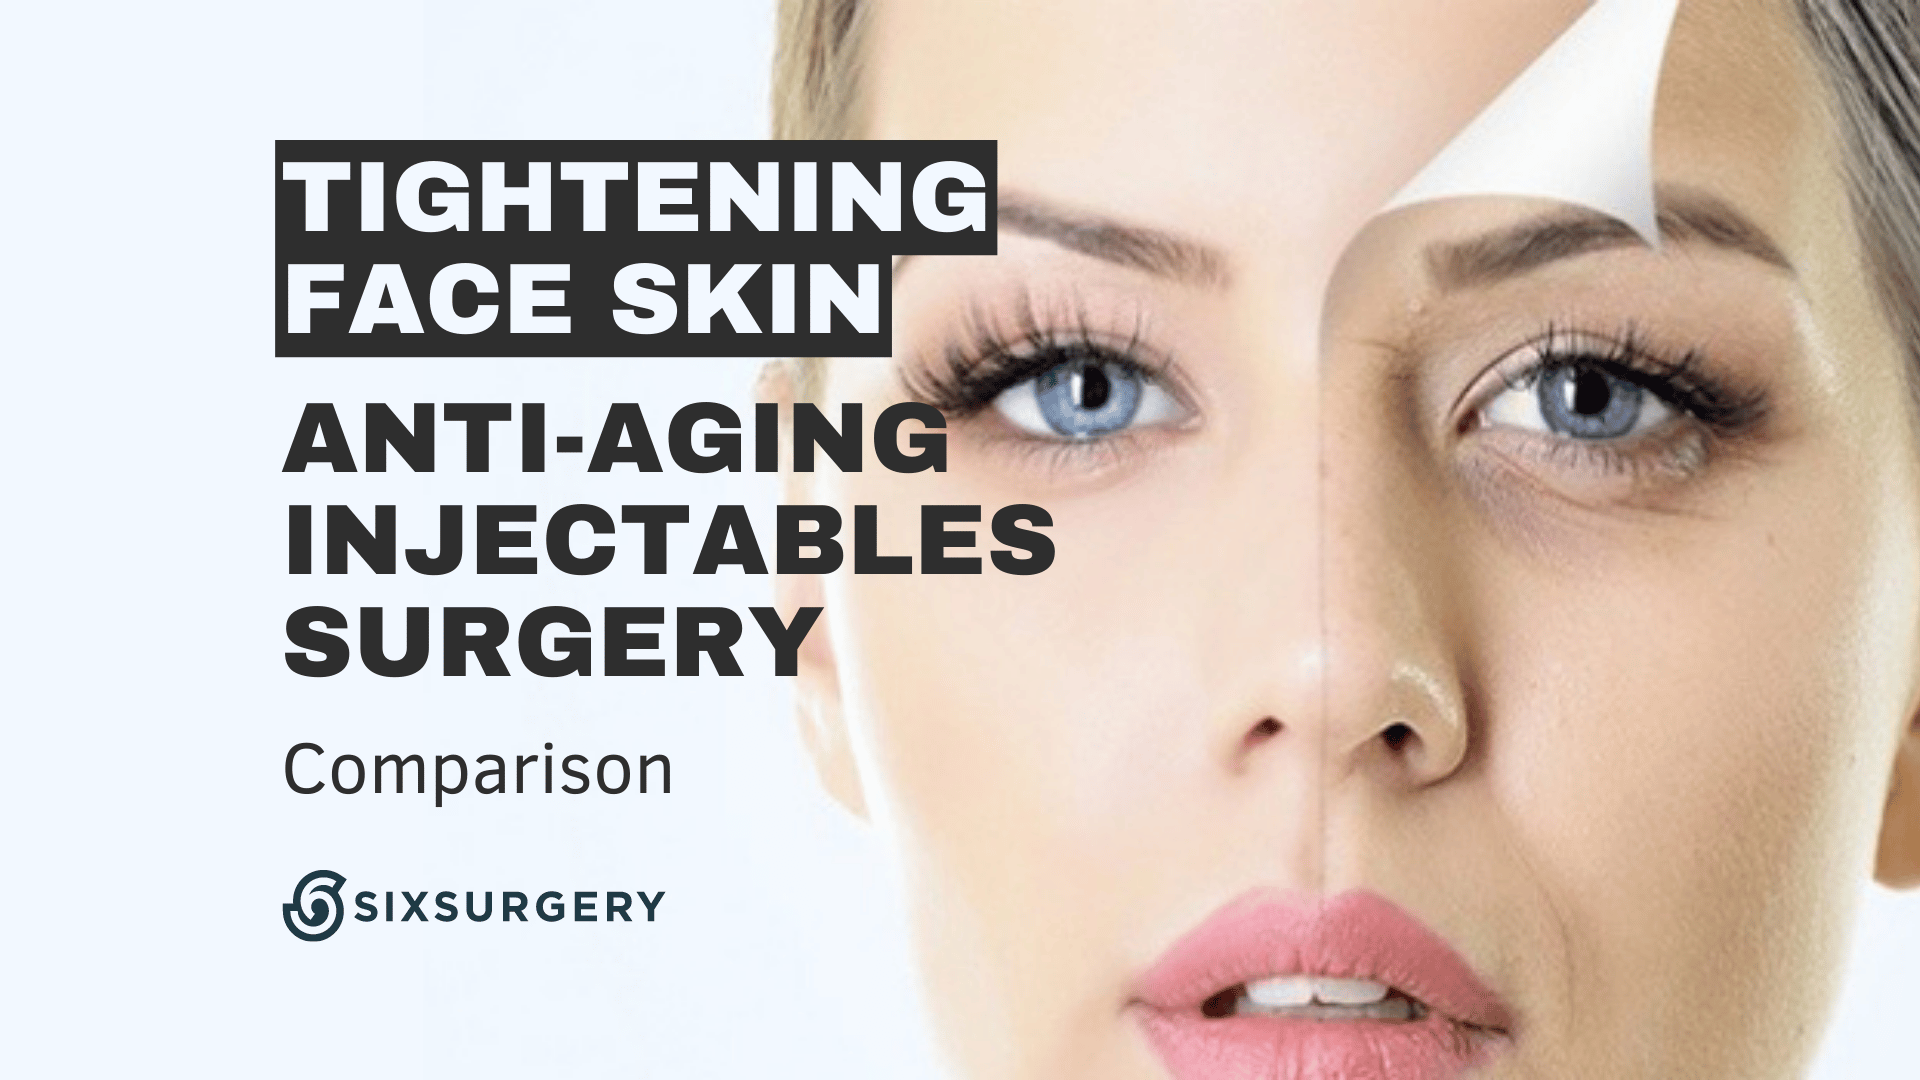 How to Tighten Face Skin? Anti-Aging Products, Injectables or Surgery